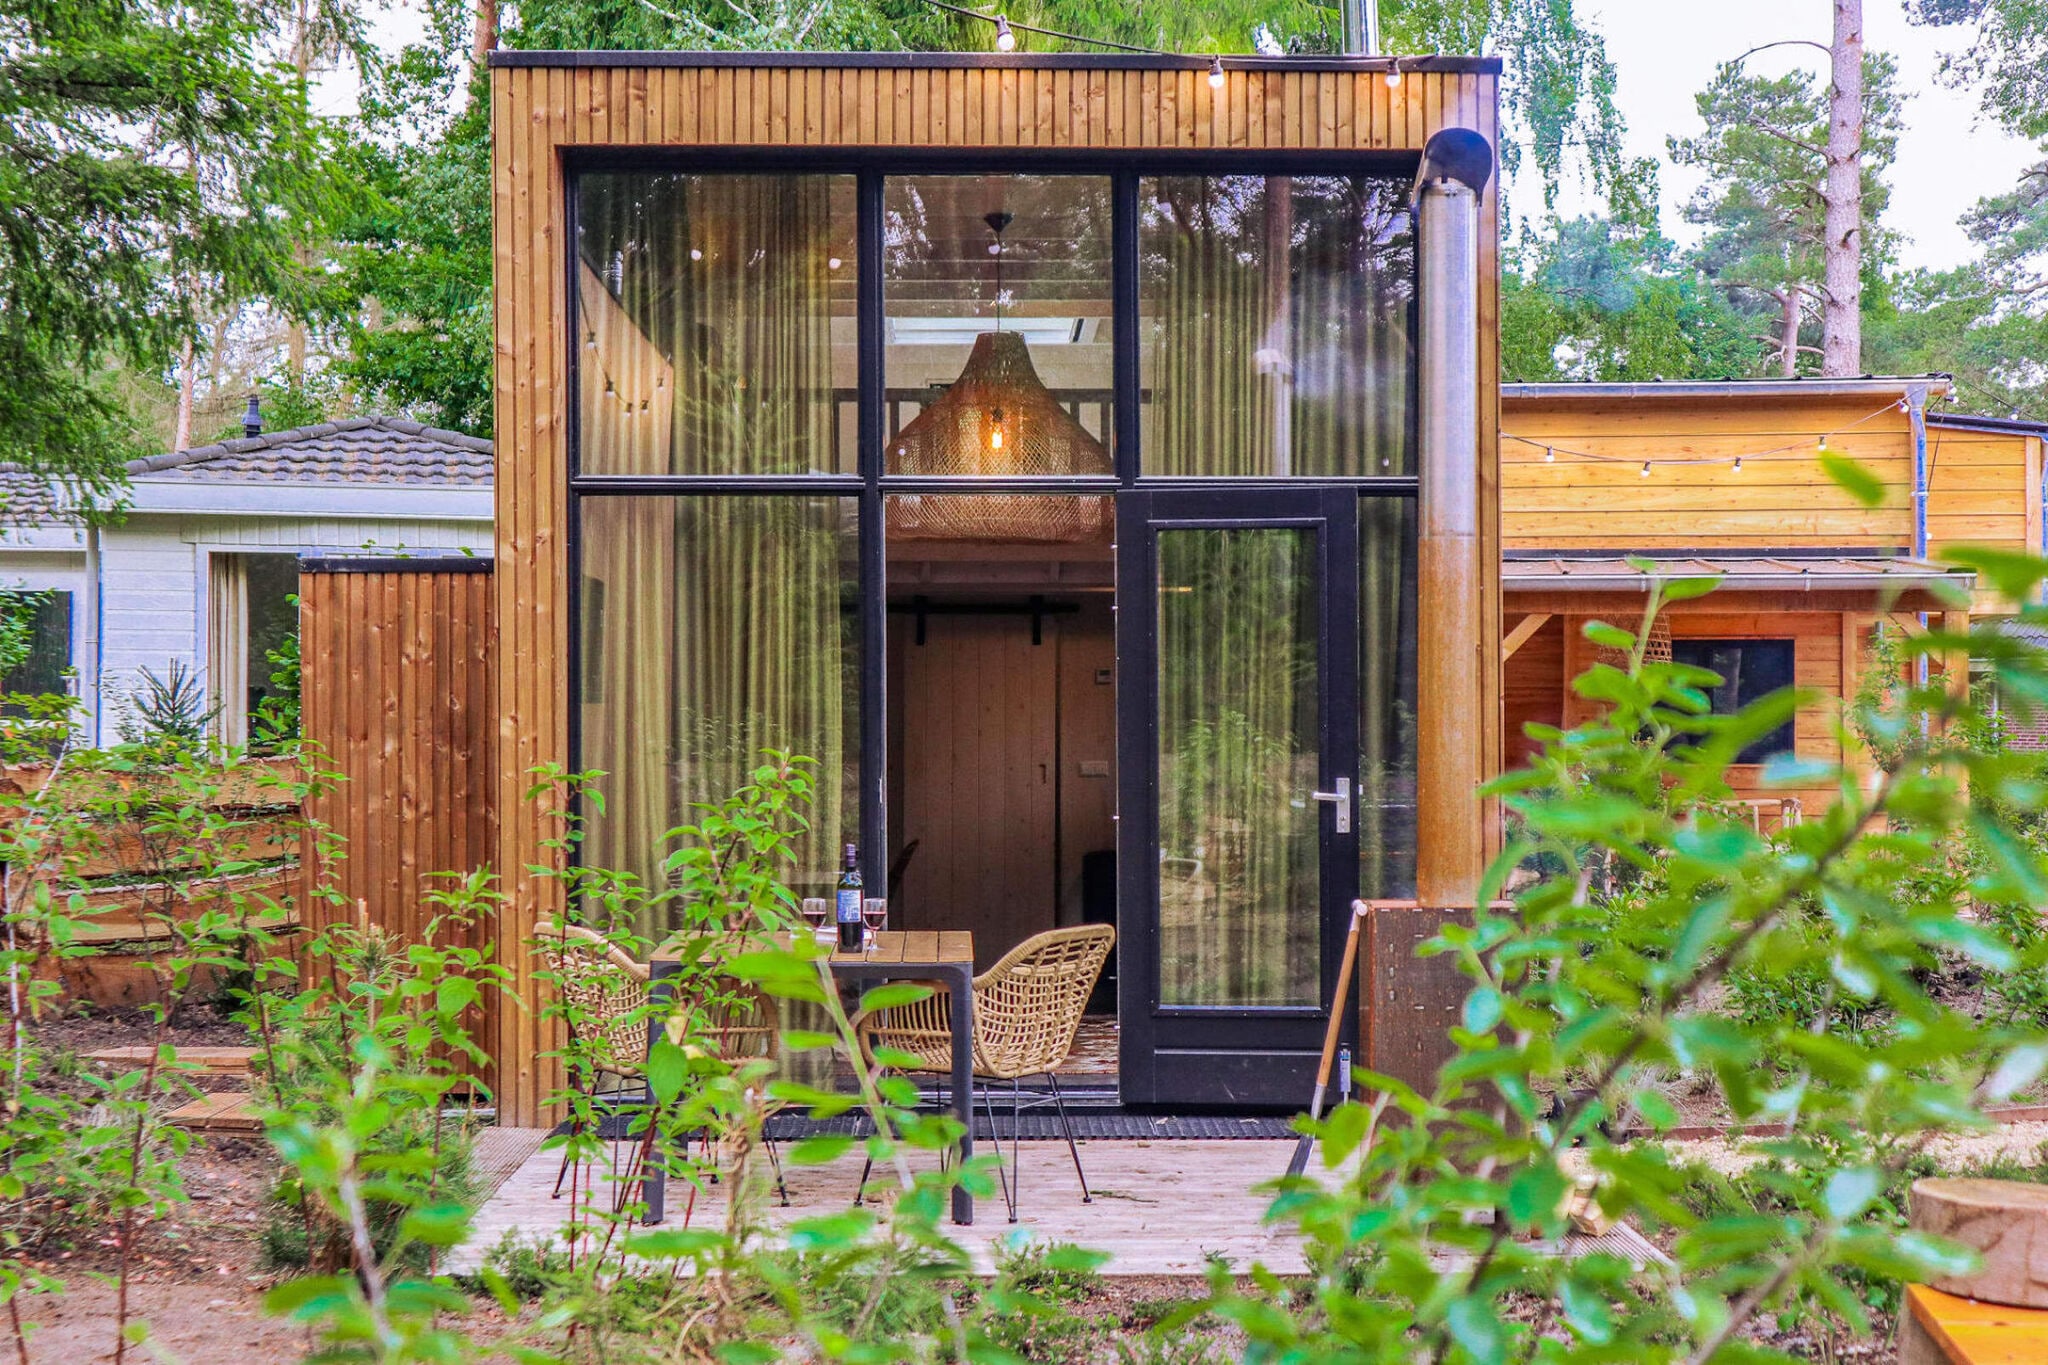 Nice tiny house with pellet stove, adjacent to the Hoge Veluwe National Park